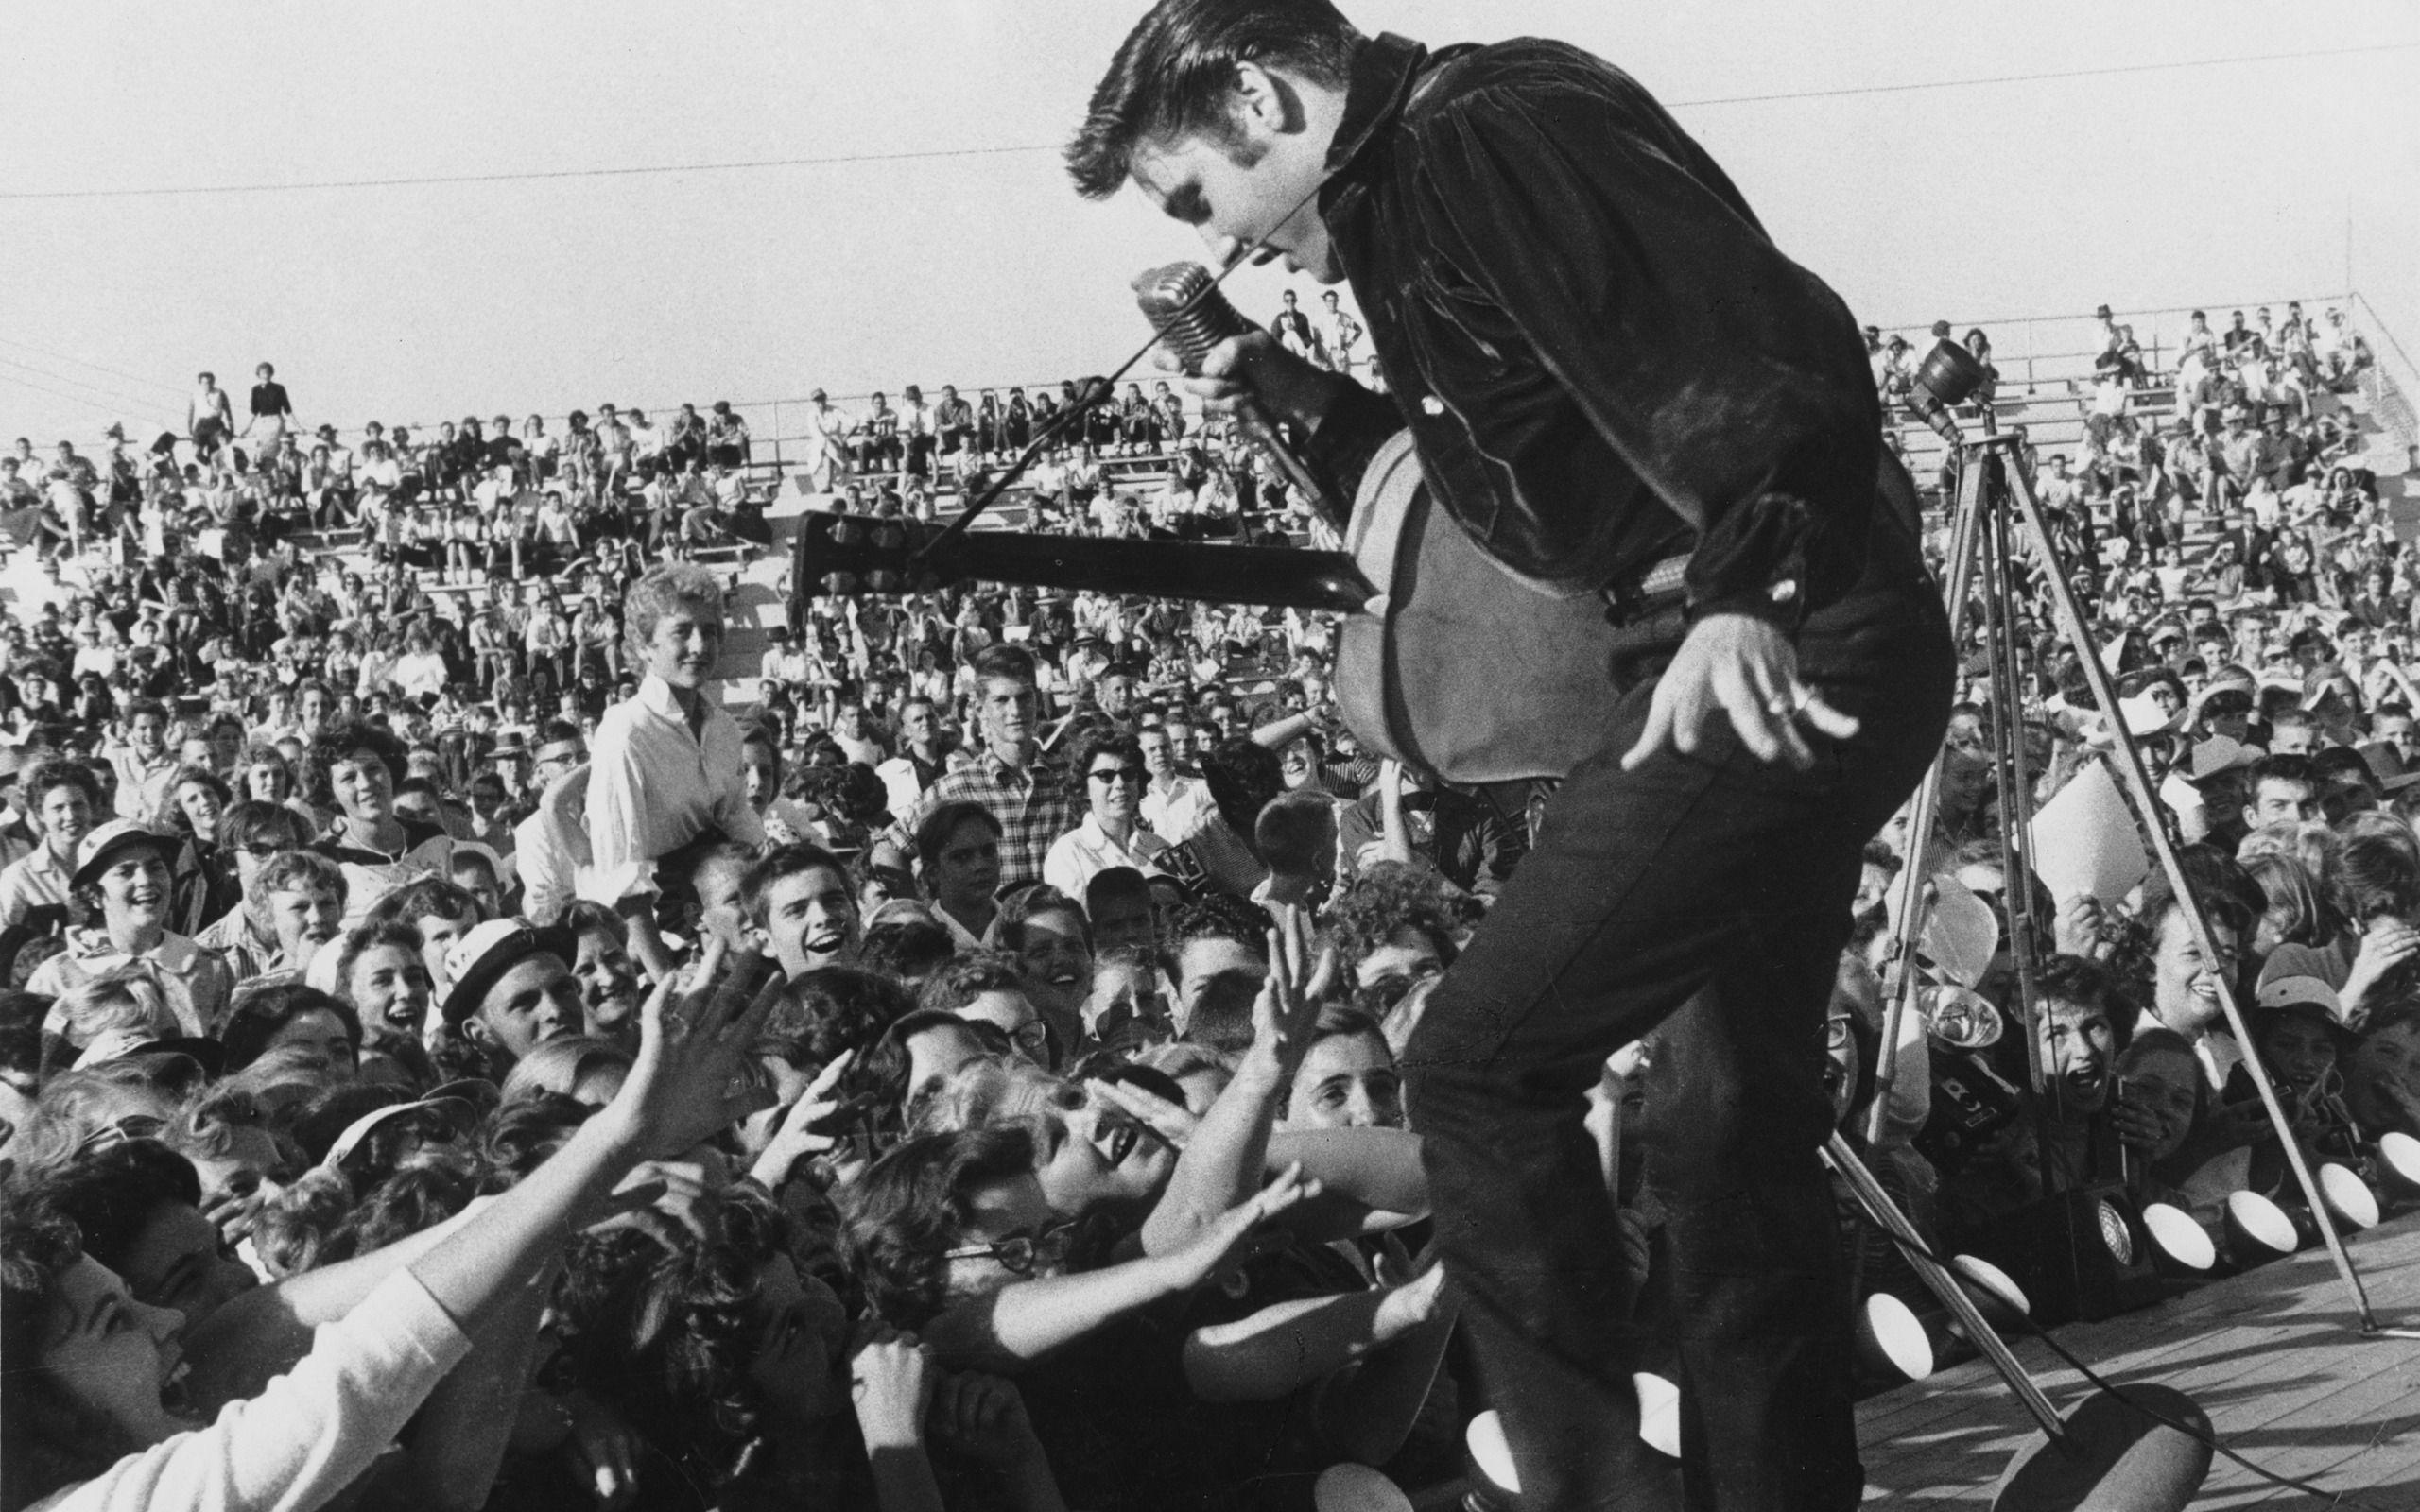 Rock and Roll Dance: World Famous And Recognizable Singer, Elvis Aaron Presley, King Of Rock And Roll, "On Stage" Album, Black-And-White, 1970. 2560x1600 HD Wallpaper.